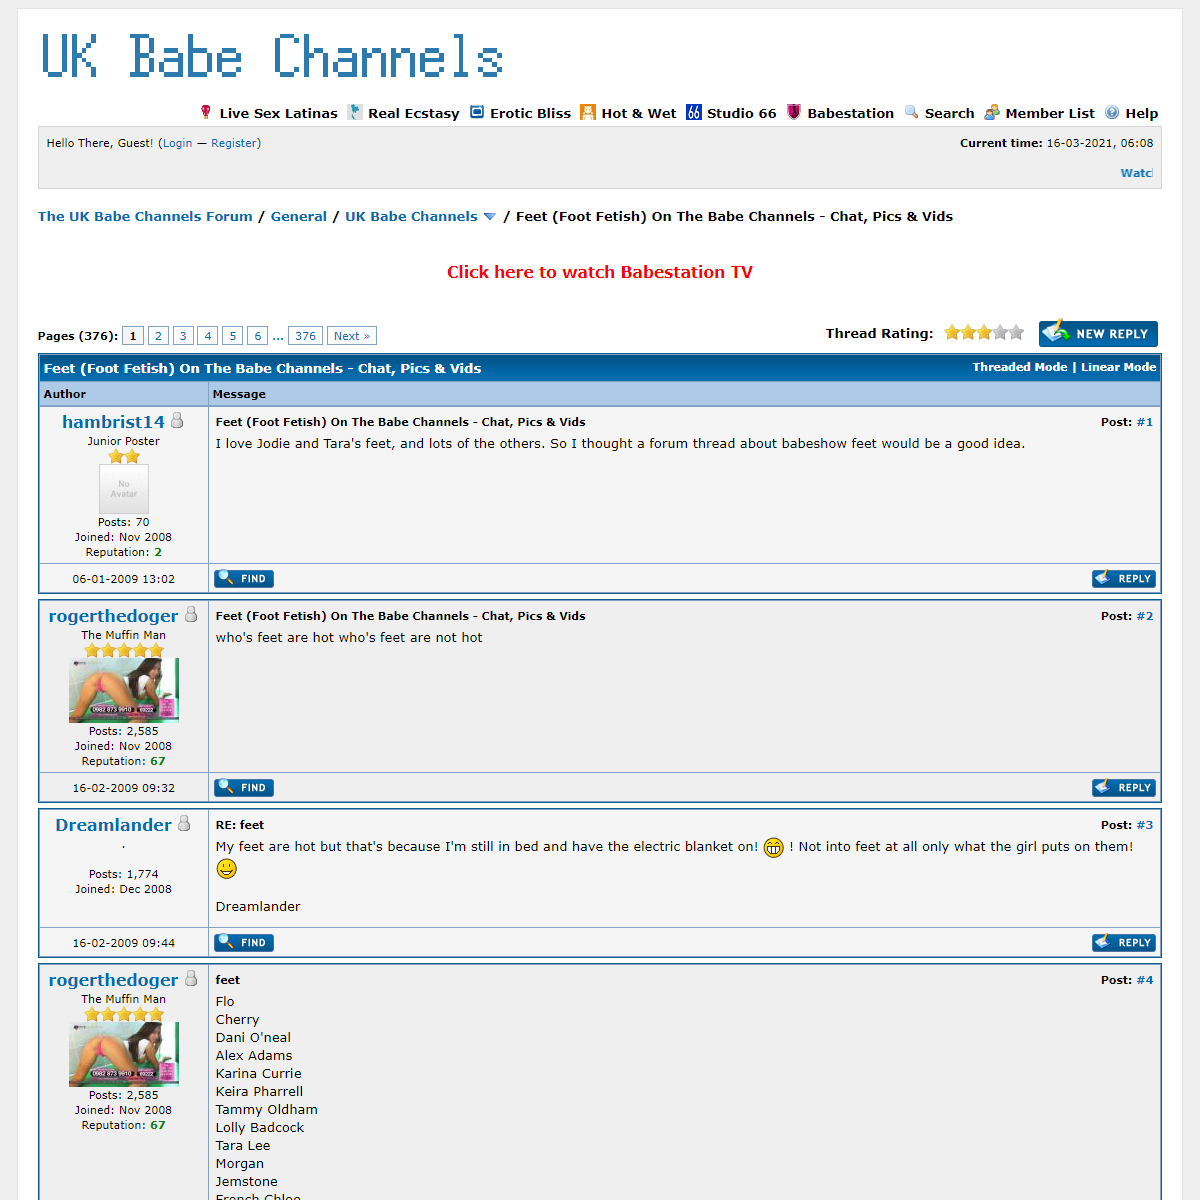 A complete backup of https://www.babeshows.co.uk/showthread.php?tid=11541